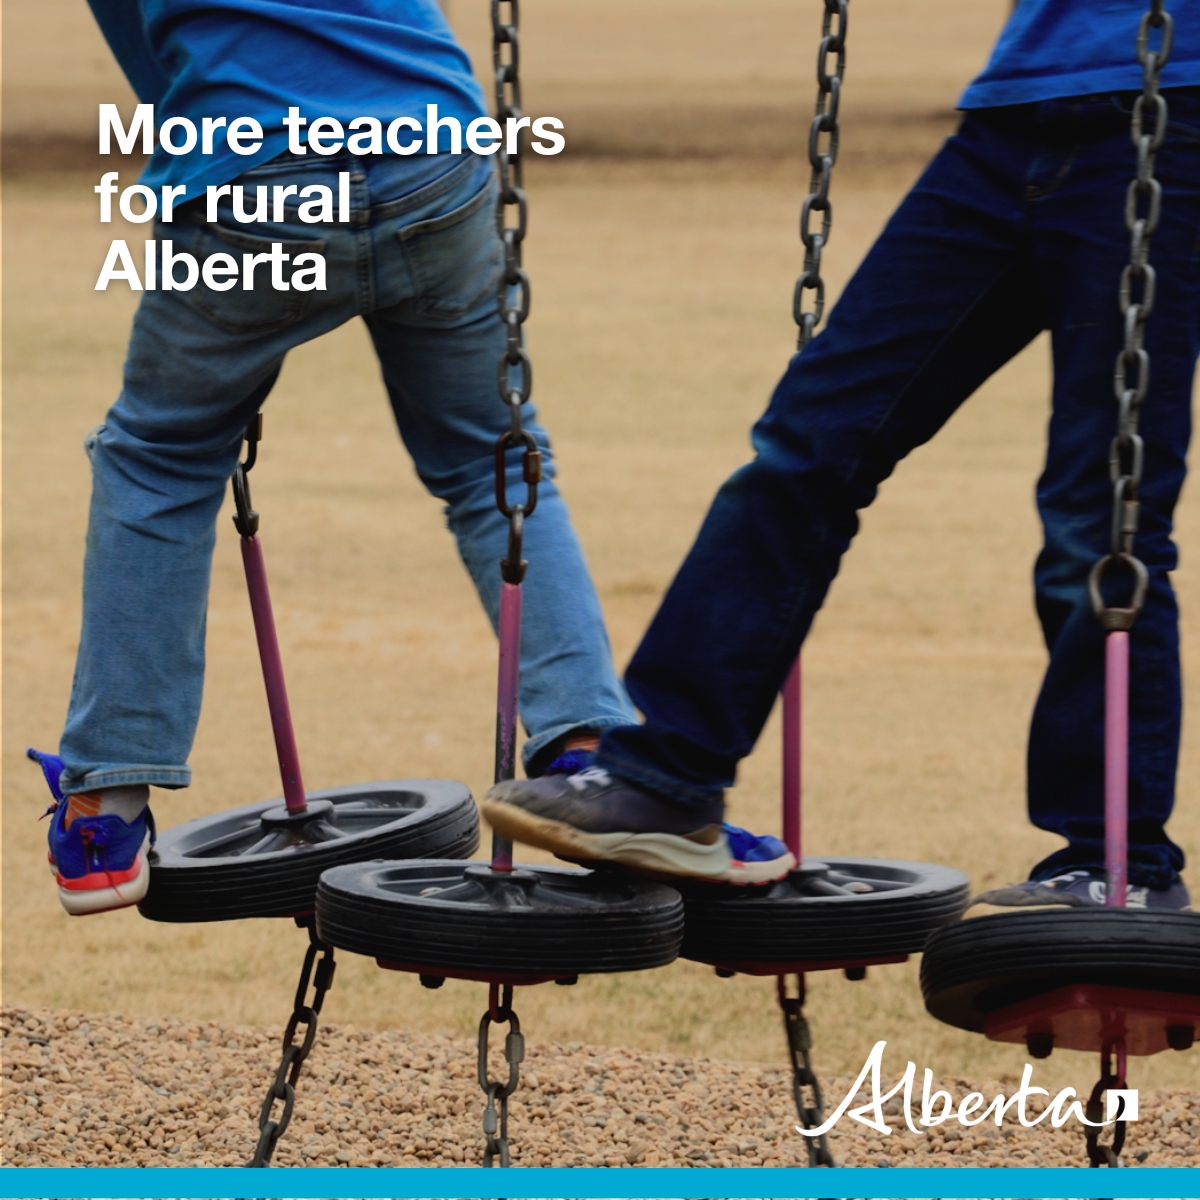 Every student deserves an education that prepares them for success, no matter where they learn. To help, @AlbertaEd is funding new student spaces at @UCalgaryEduc & @UAlbertaEd to recruit & train more rural, remote & Indigenous teachers: alberta.ca/release.cfm?xI… #abed